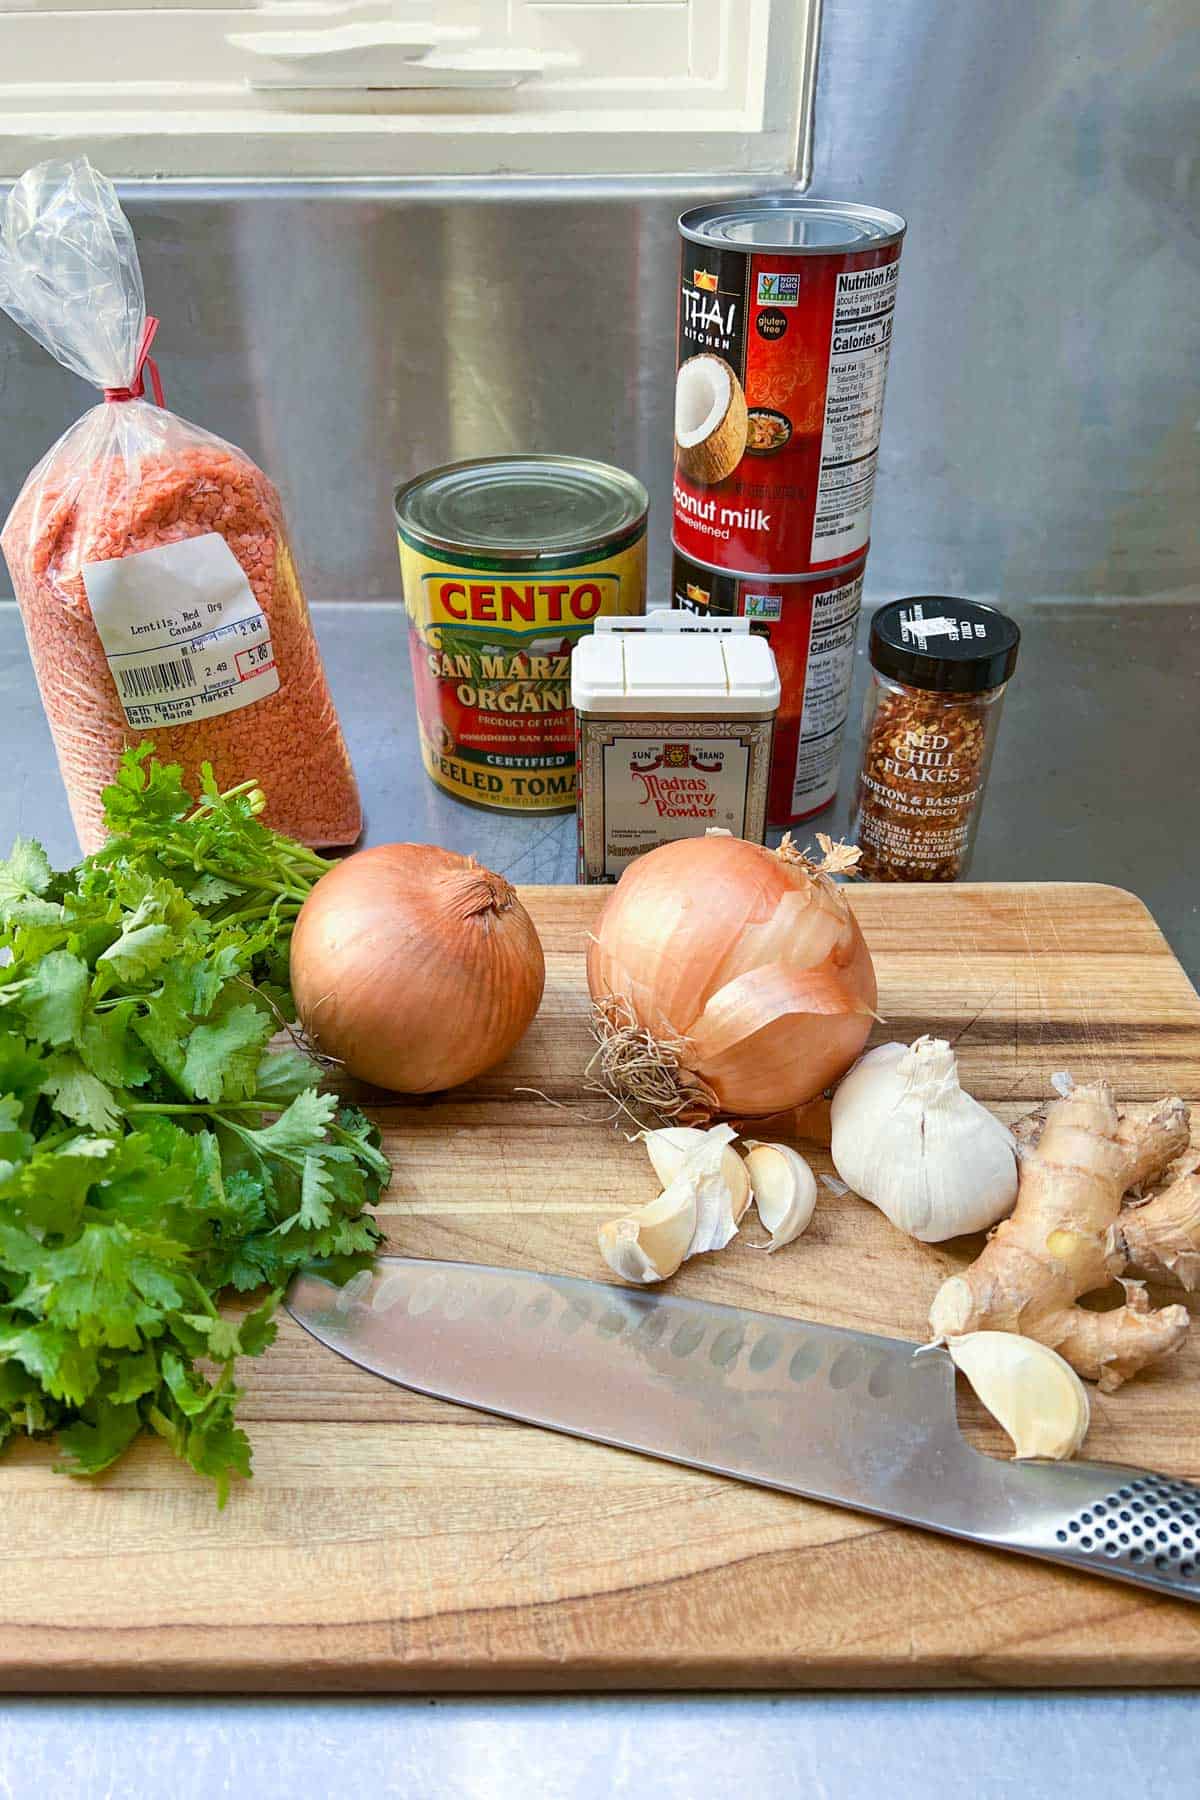 ingredients on a countertop: bag of red lentils, can of cento peeled tomatoes, container of madras curry powder, jar of red chili flakes, 2 cans of coconut milk, bunch of cilantro, 2 yellow onions, bulb of garlic, hunk of ginger root, kitchen knife.